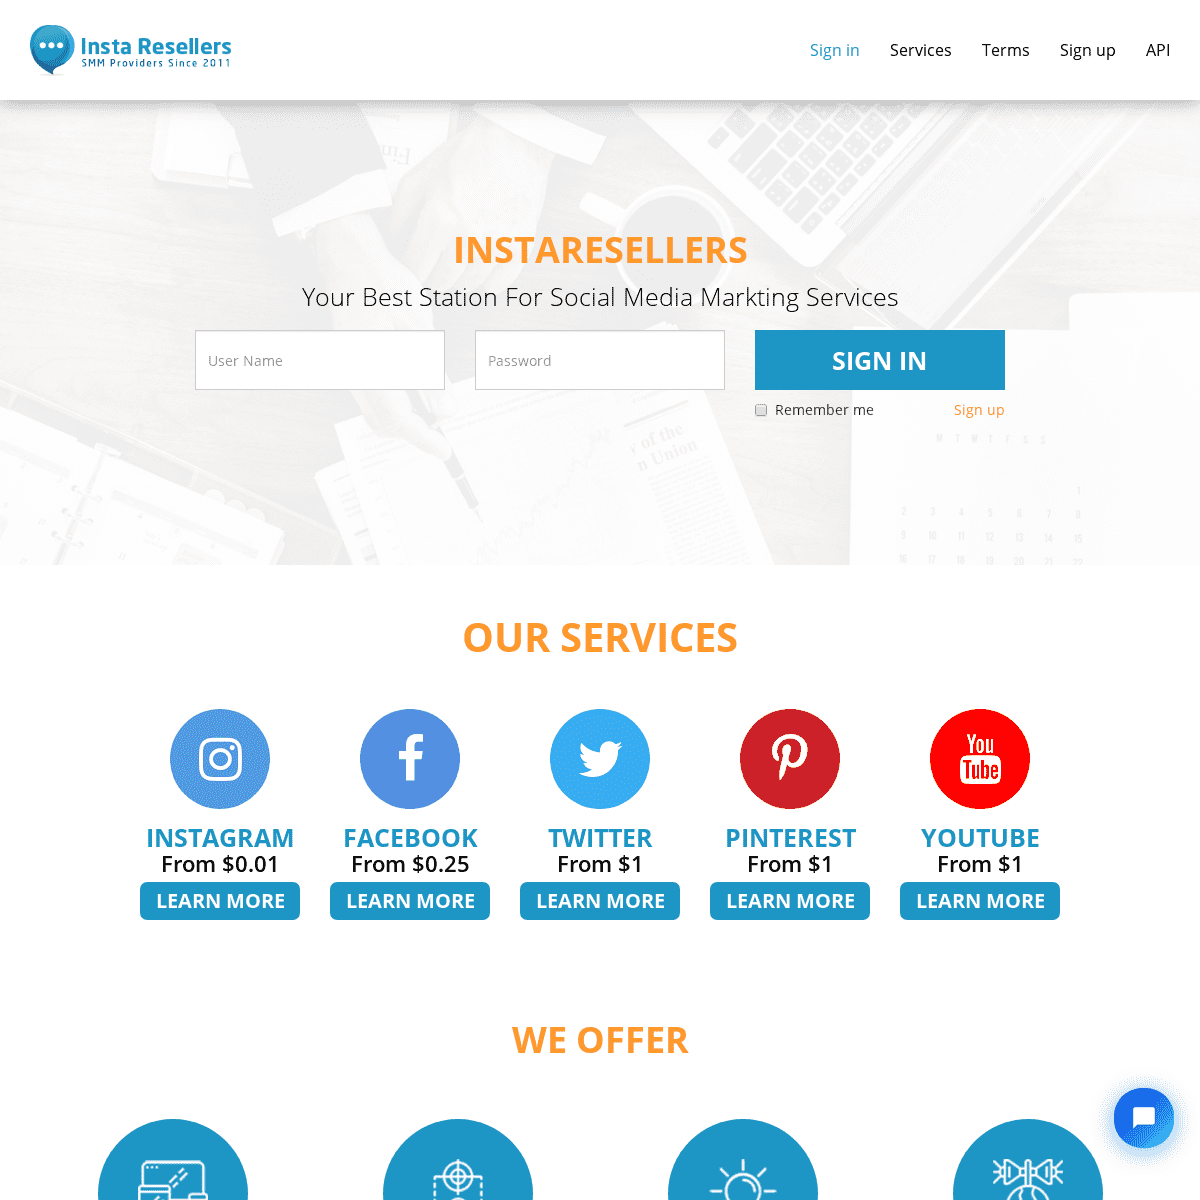 A complete backup of instaresellers.com